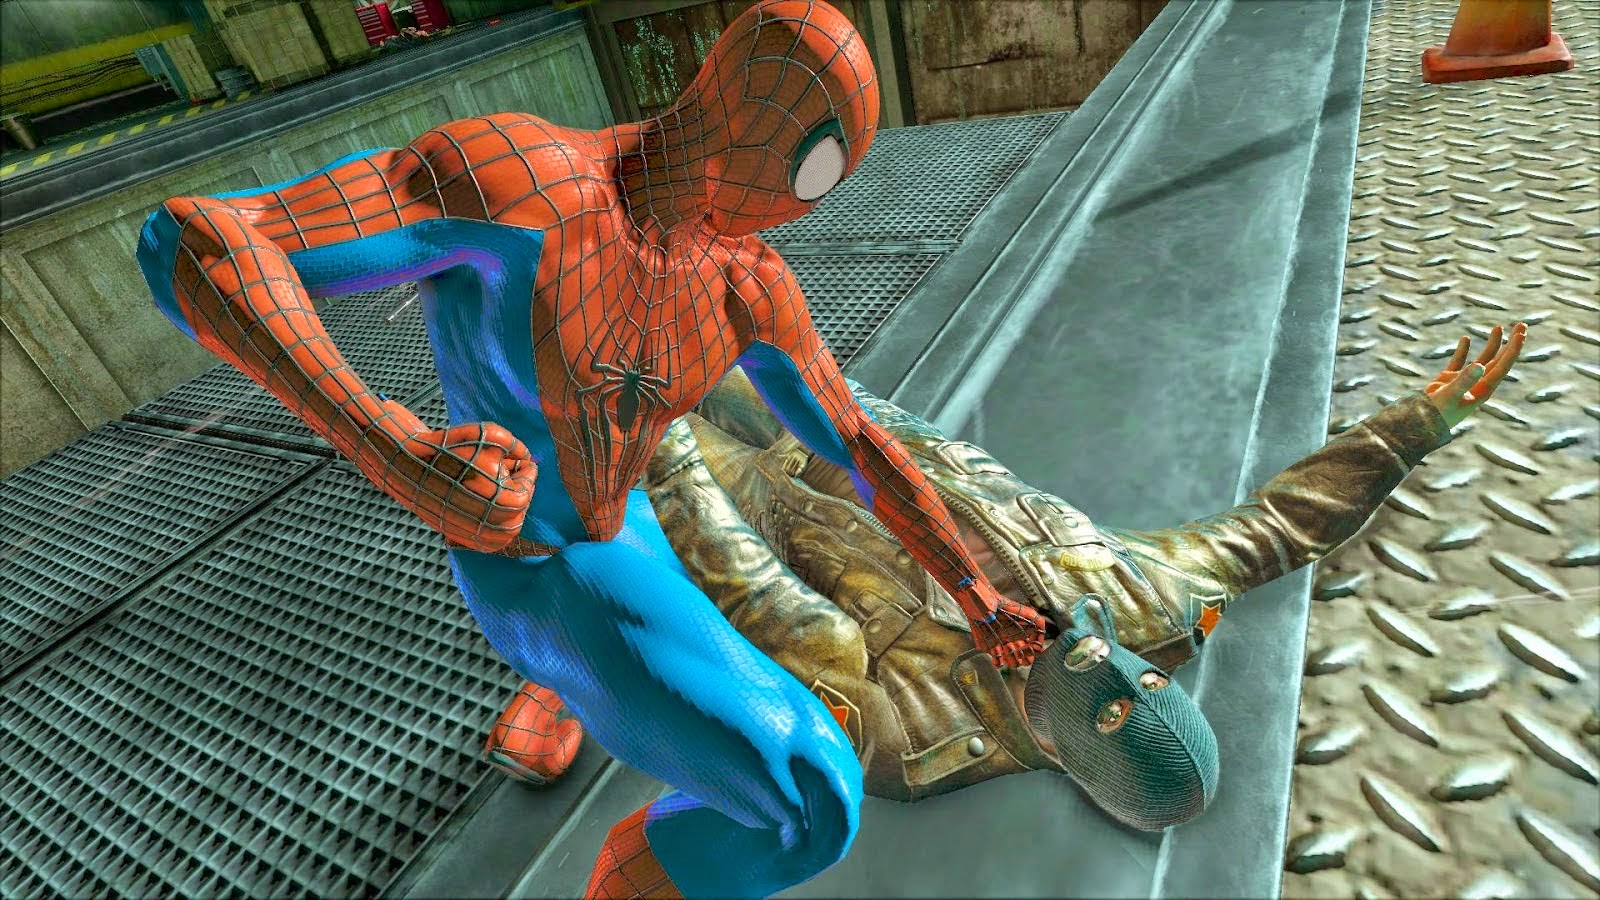 the amazing spider man 2 game apk free download